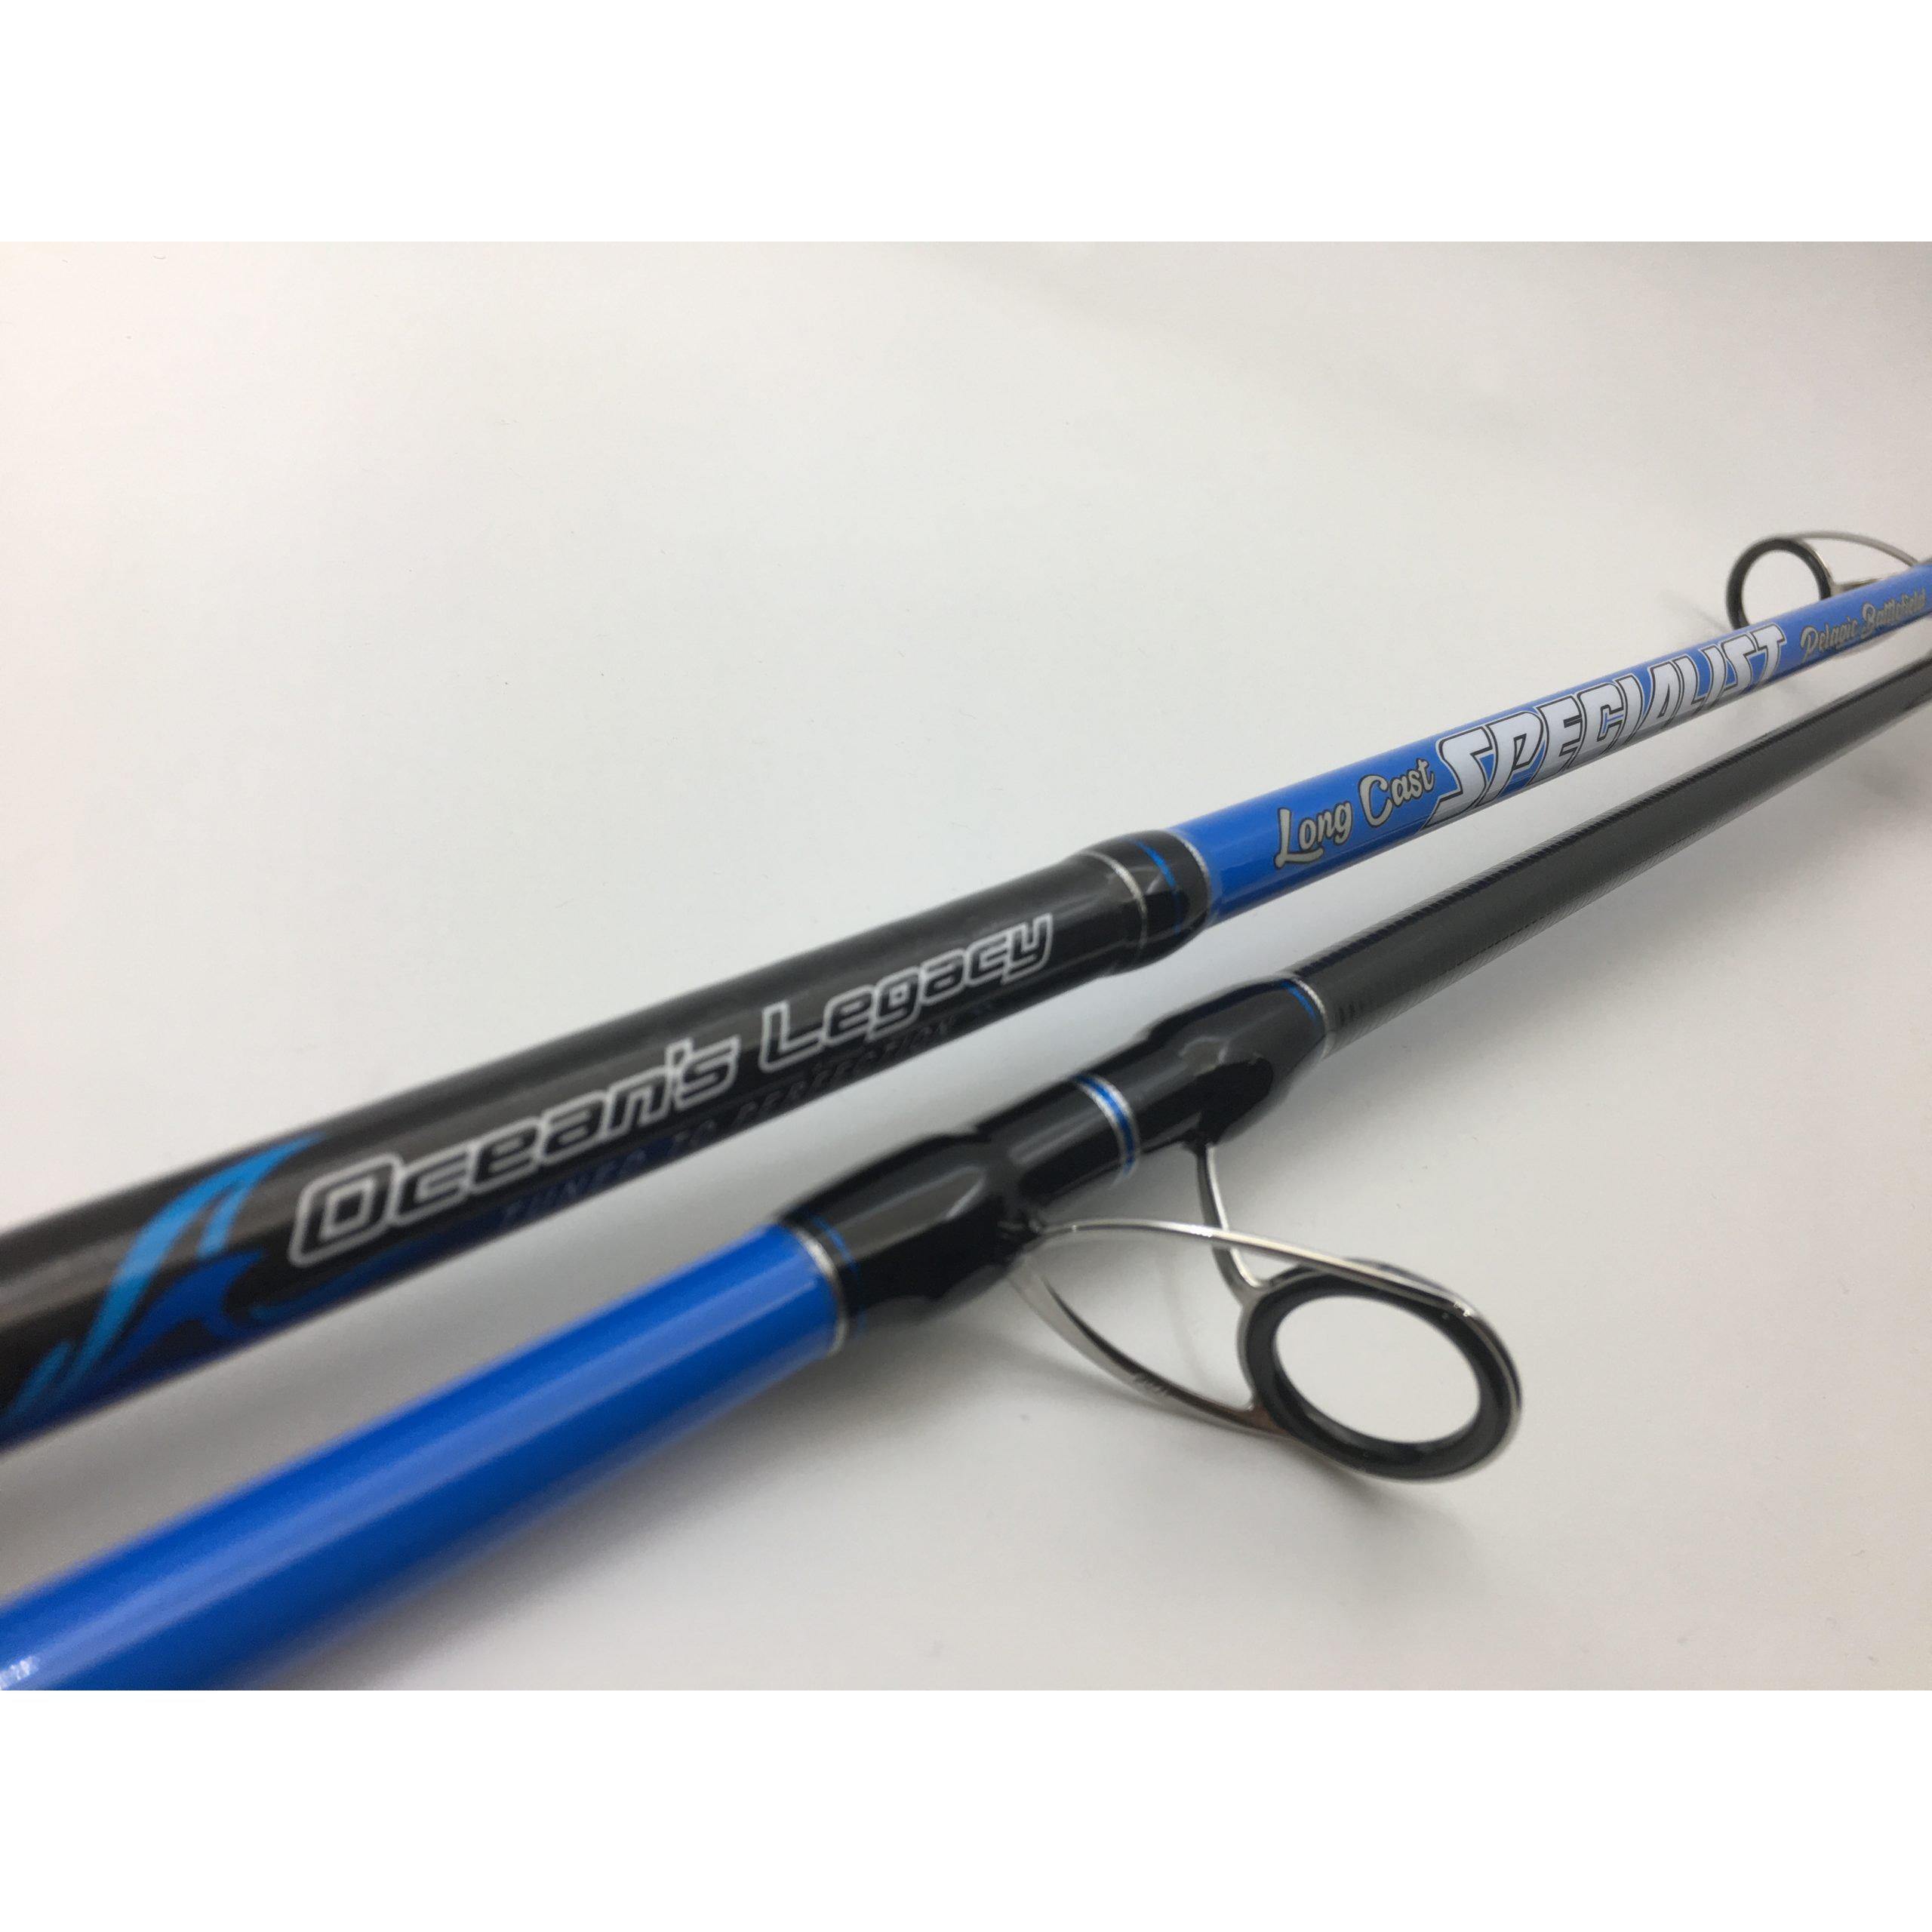 Oceans Legacy Specialist Spin Fishing Rod